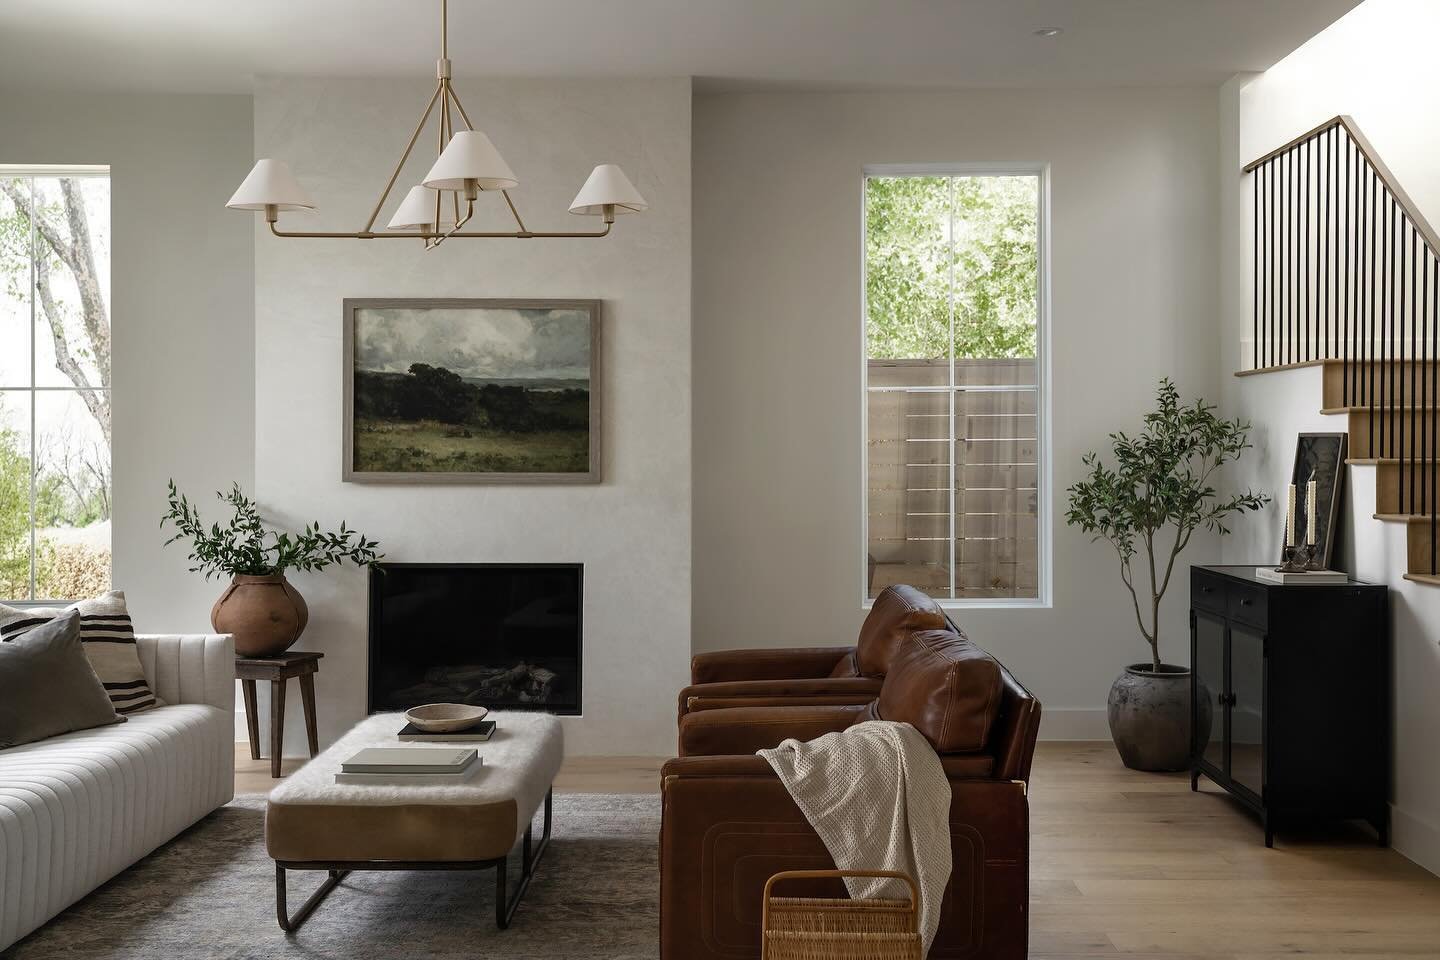 When you walk into this modern cottage, you&rsquo;re immediately greeted with an open-concept floor plan that connects the entry, dining room, living room, and kitchen. On the back wall, large slider doors create beautiful shadows and reflections tha